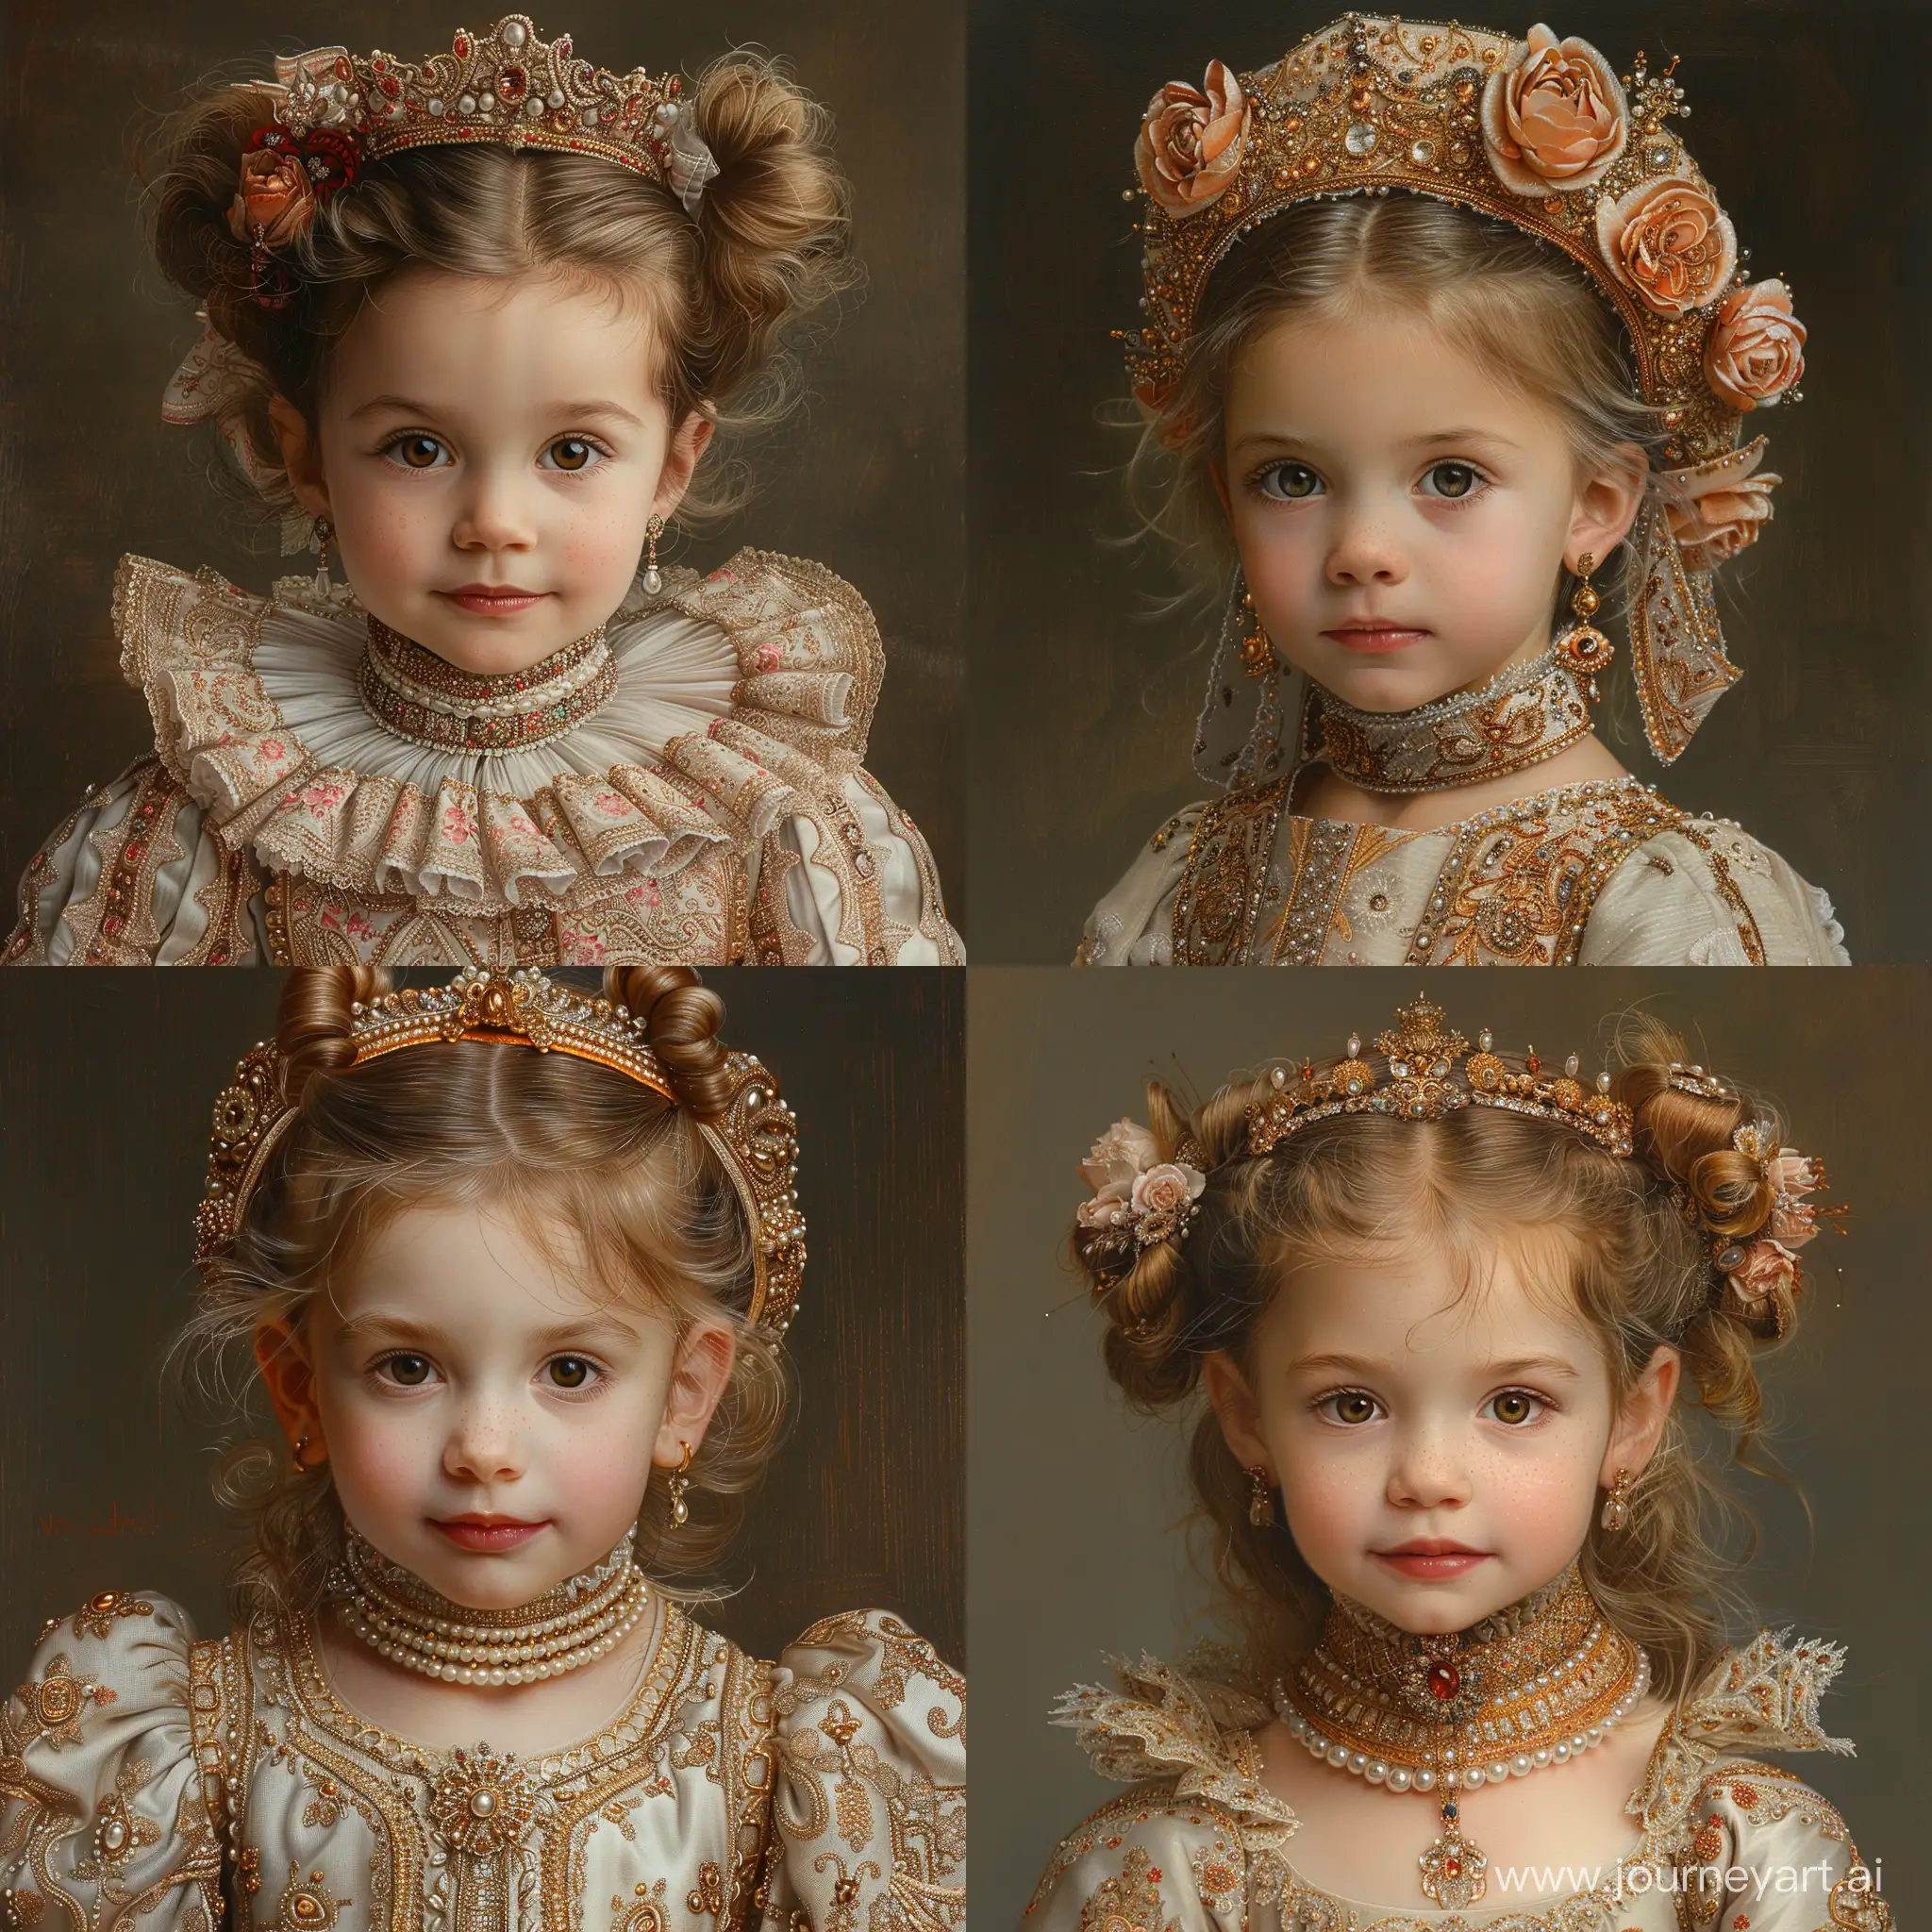 oil portrait painting of a little girl
 dressed in an elaborate and ornate costume reminiscent of European aristocracy or royalty from a historical period, the Renaissance  era.  --style raw --stylize 750 --v 6